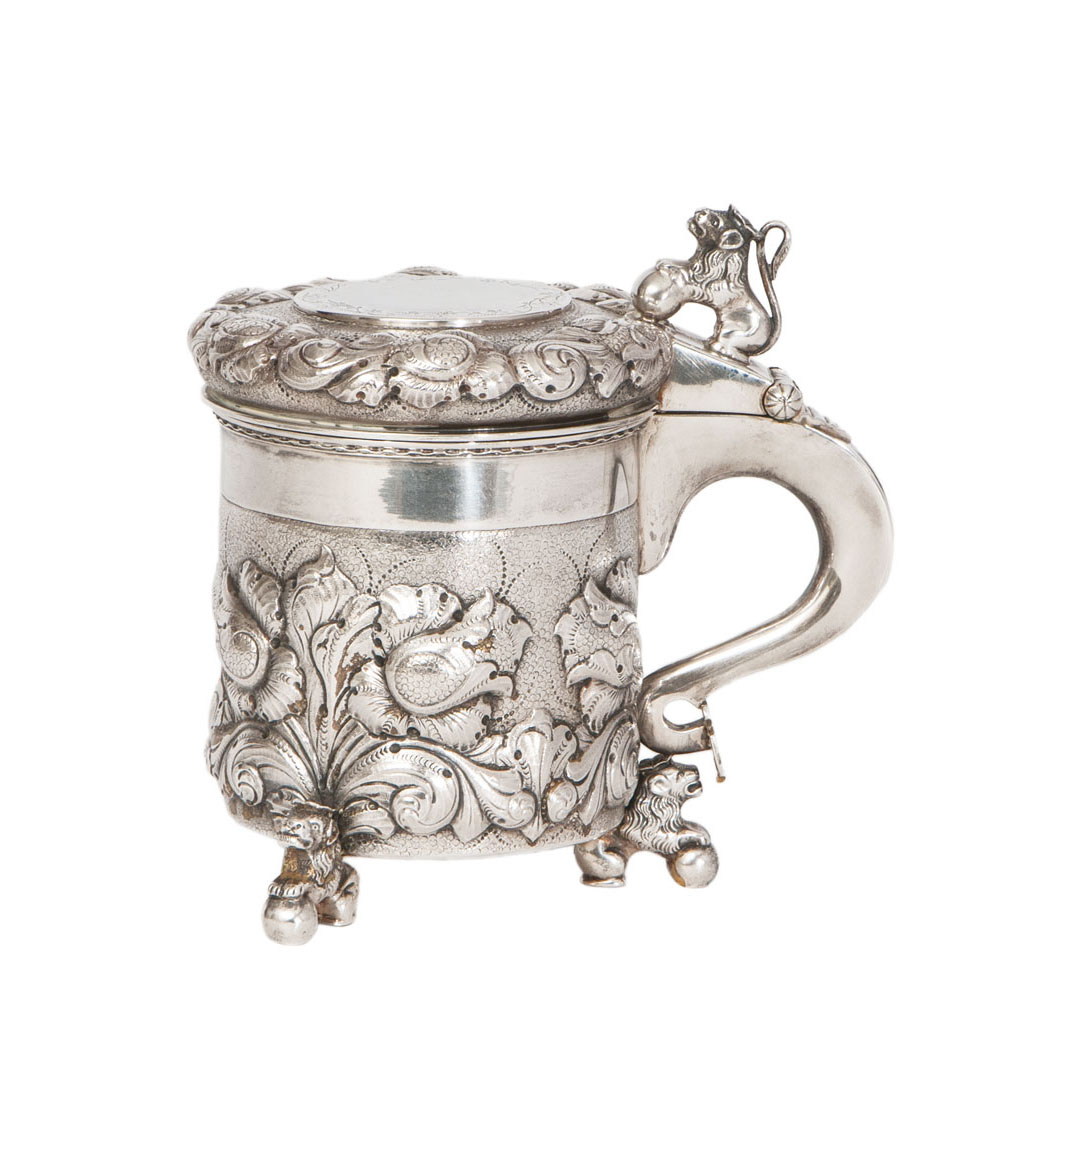 A tankard of Baroque style